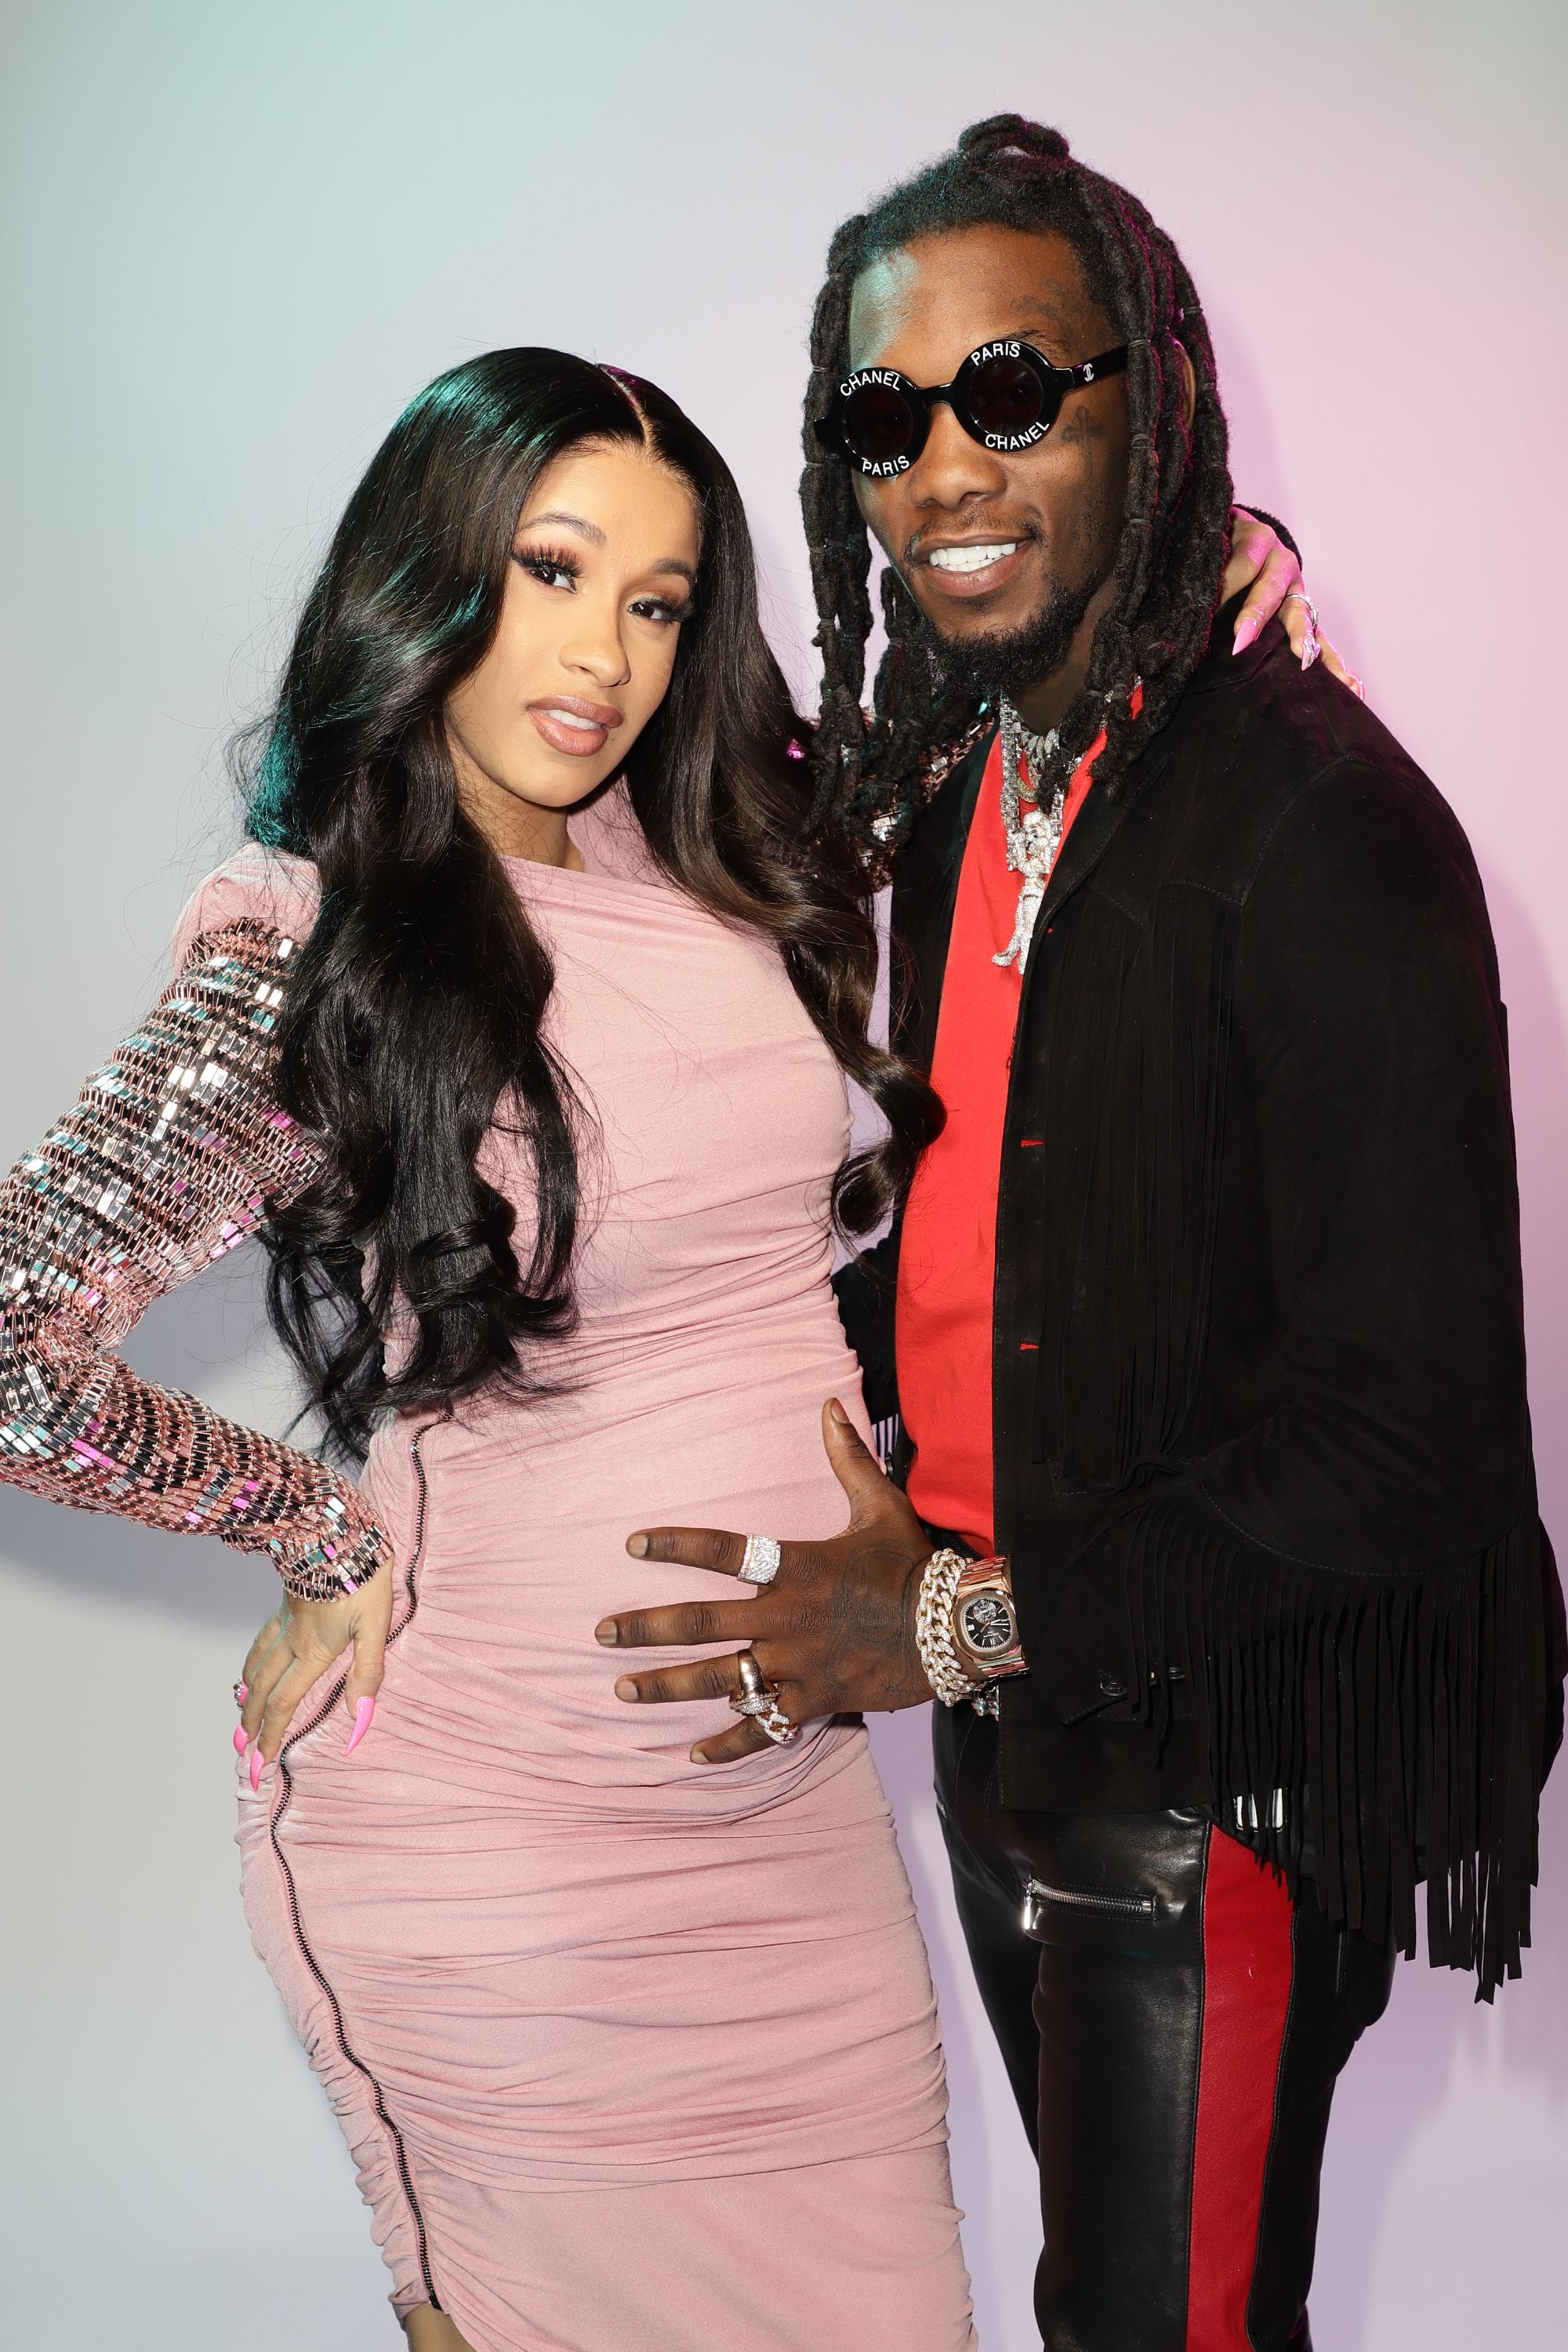 Cardi B Defends Offset Giving Daughter a Birkin Bag for 2nd Birthday